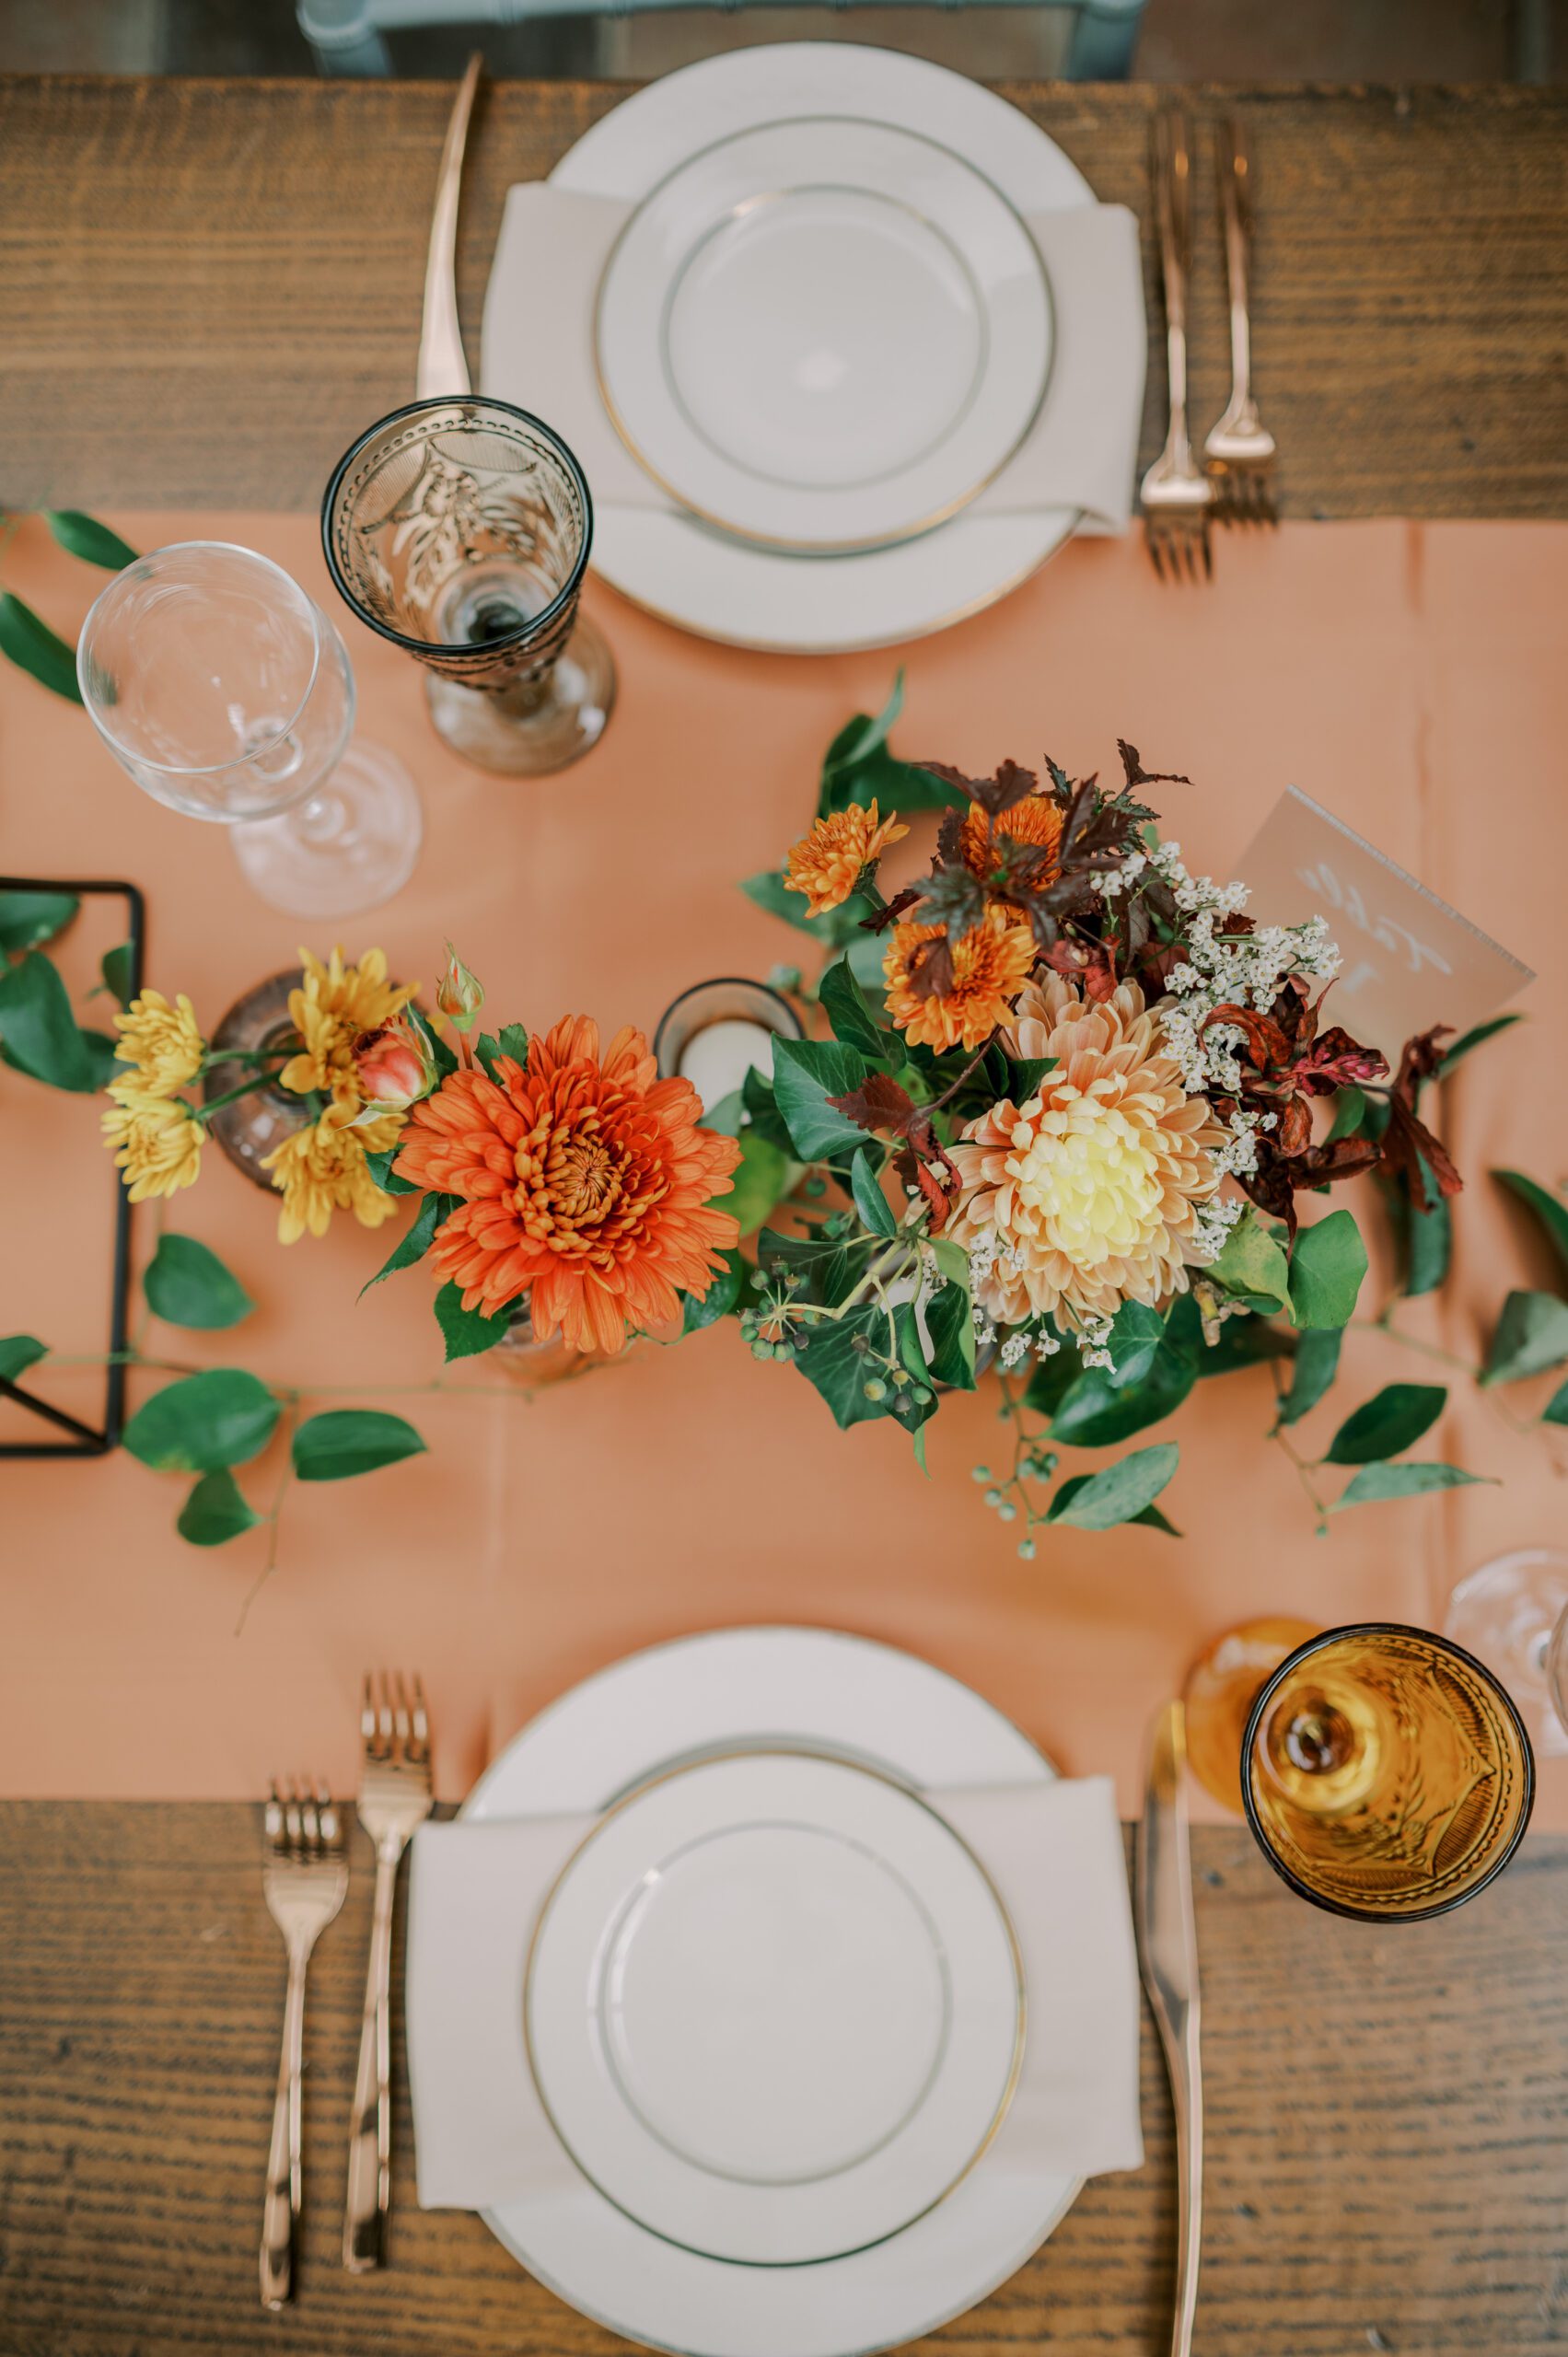 Bird's eye vide photo taken of table settings, white plates with gold rims, gold silverware, and orange, yellow and burgundy flowers in center